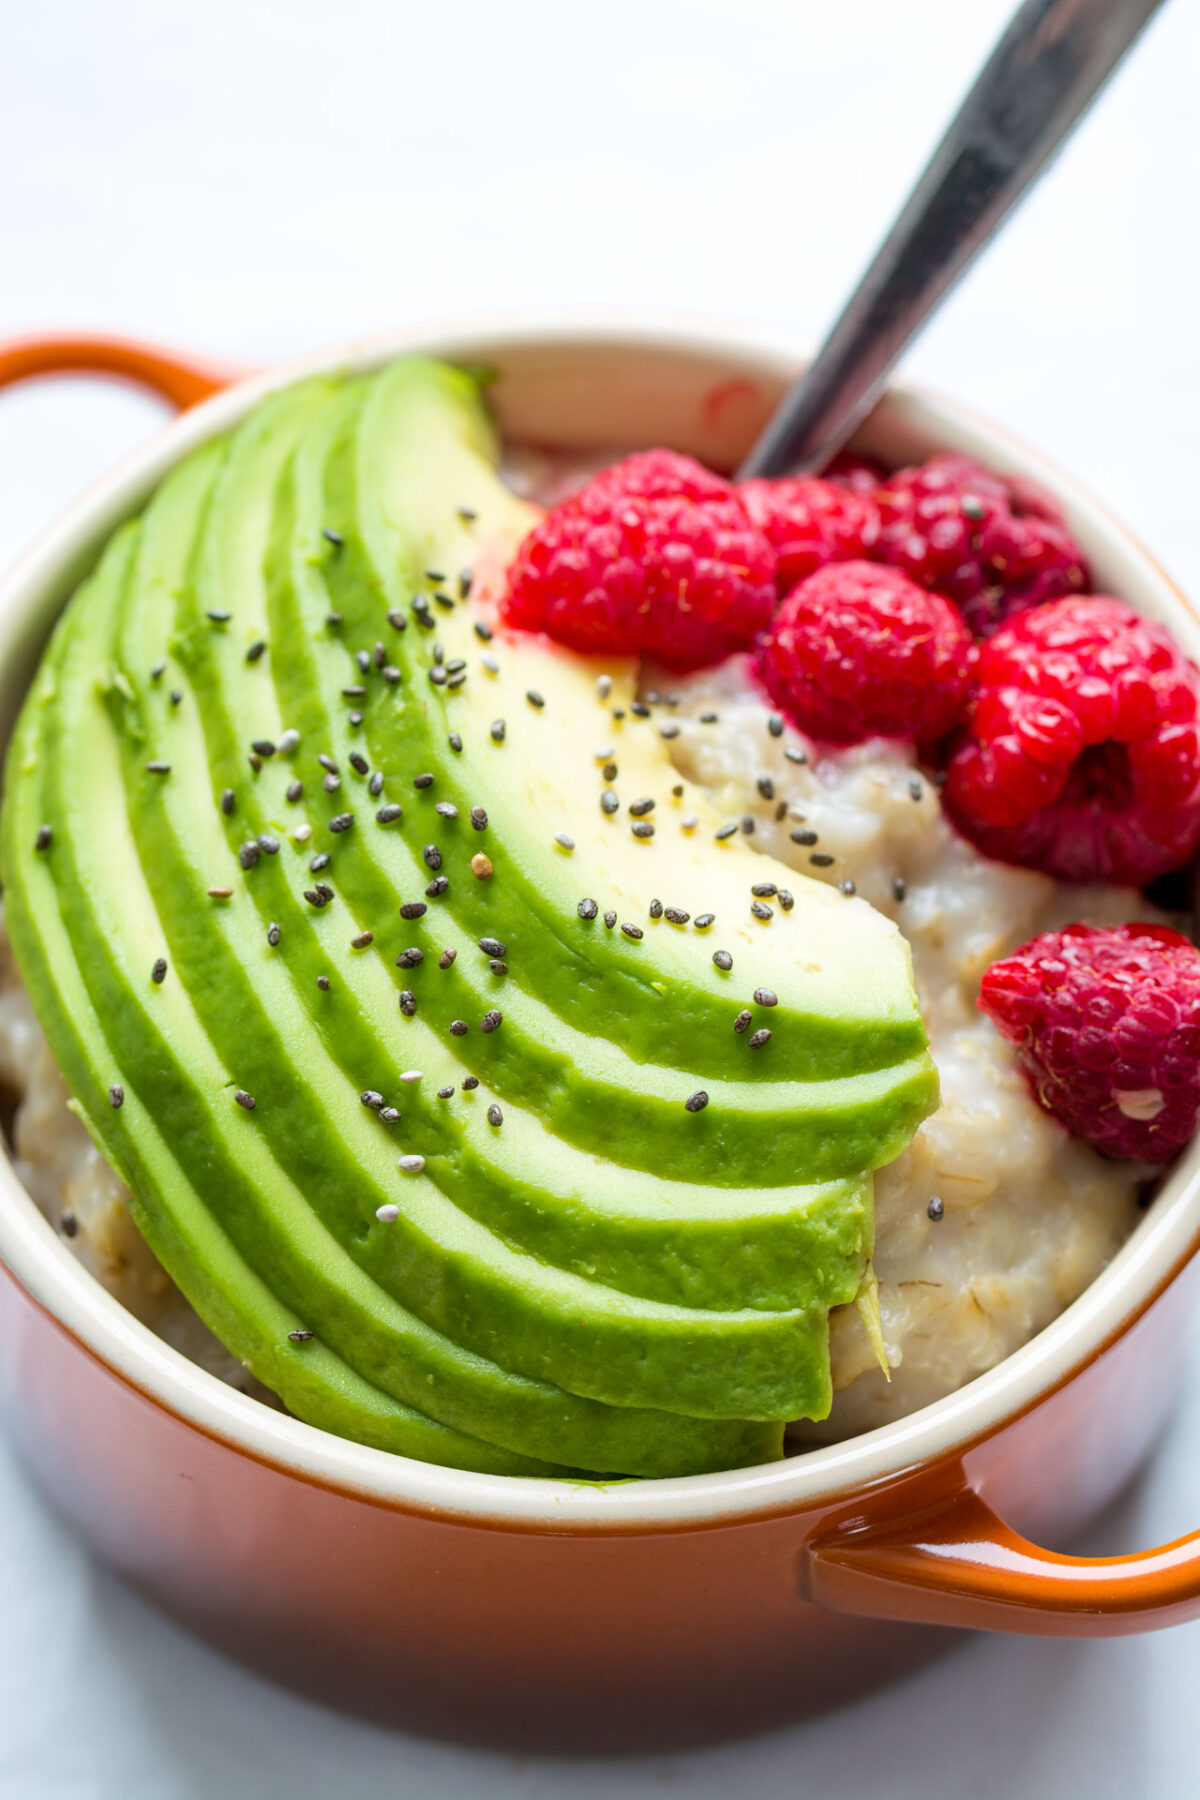 close up image of a bowl containing an oatmeal with slices of avocado, chia seeds, and raspberries